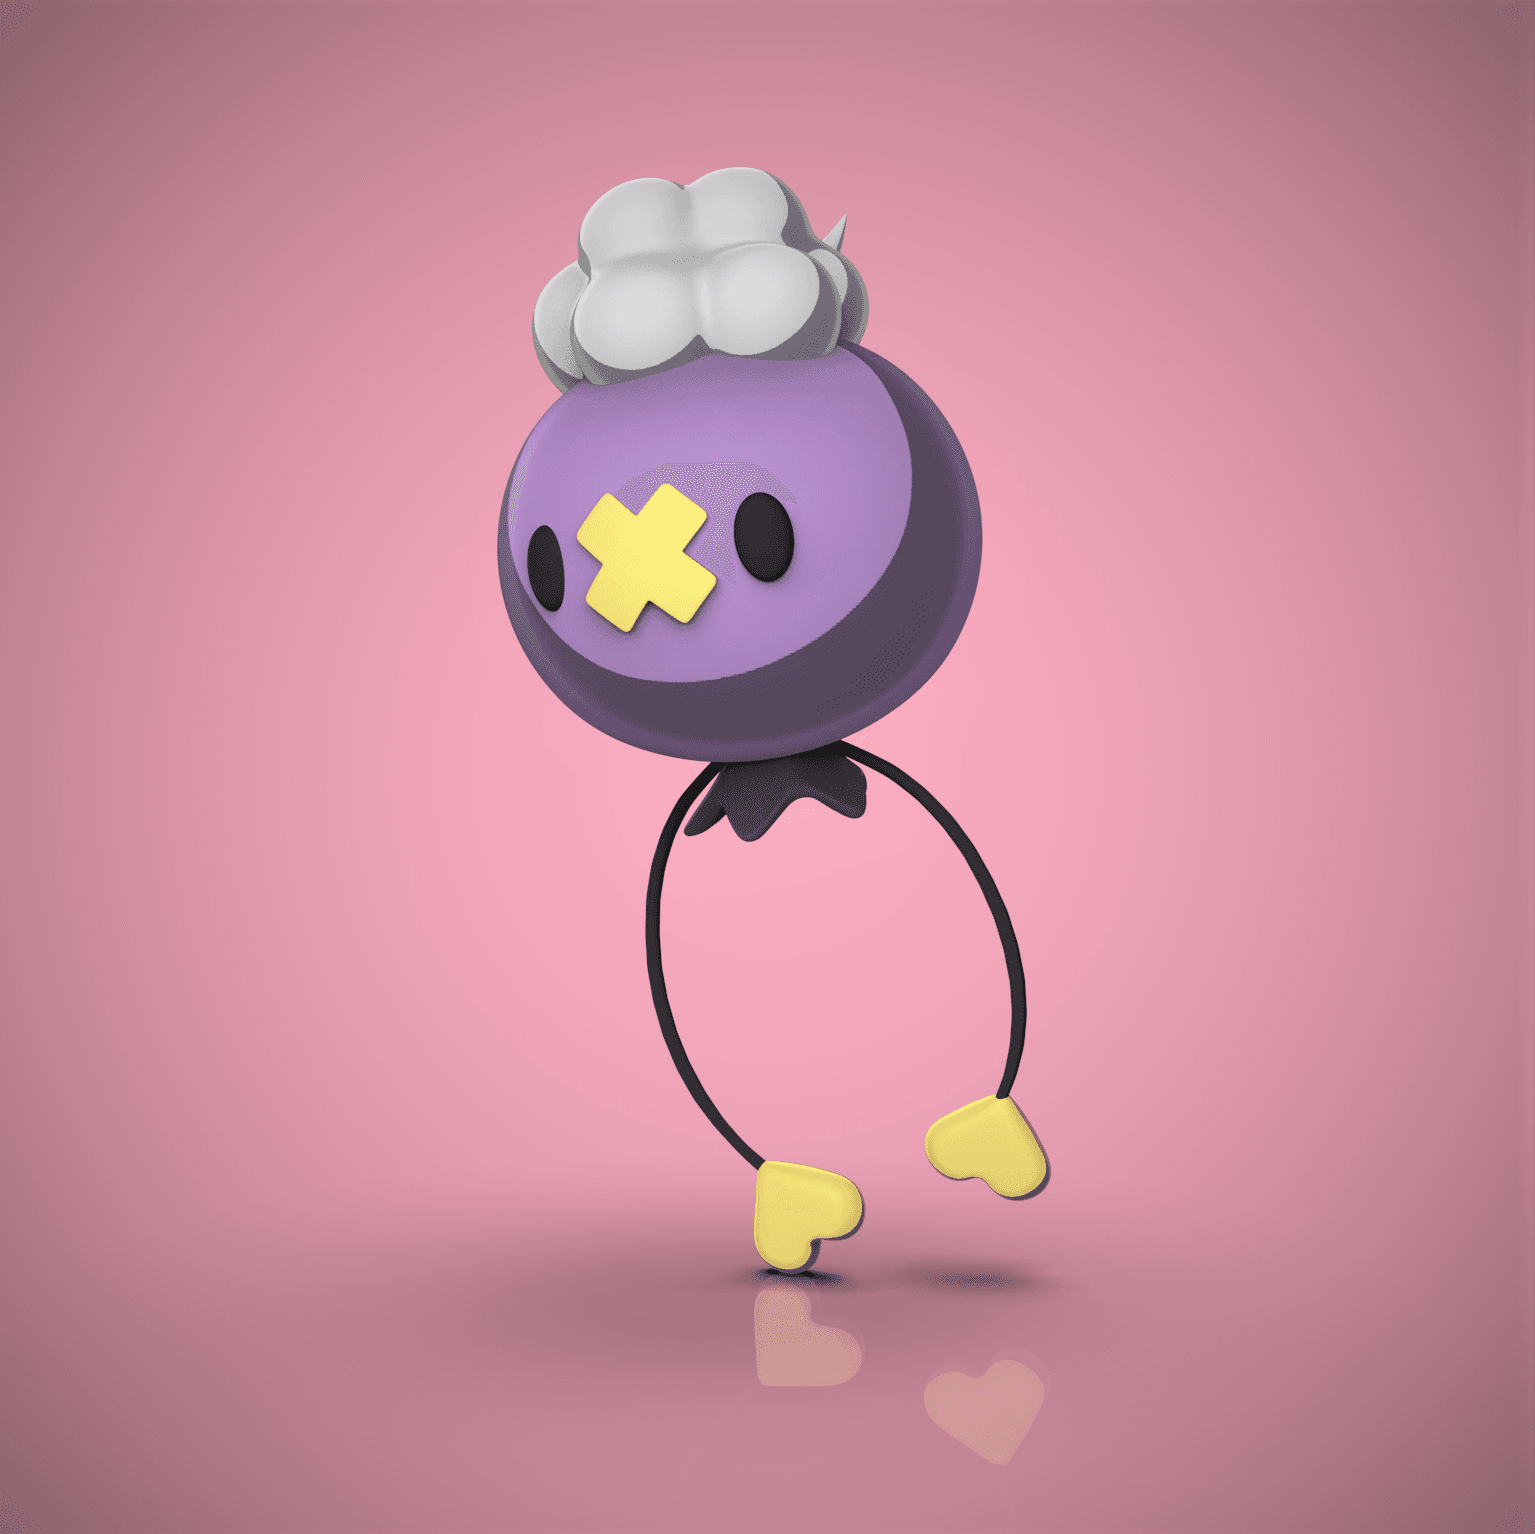 Drifloon (Pokémon) HD Wallpapers and Backgrounds